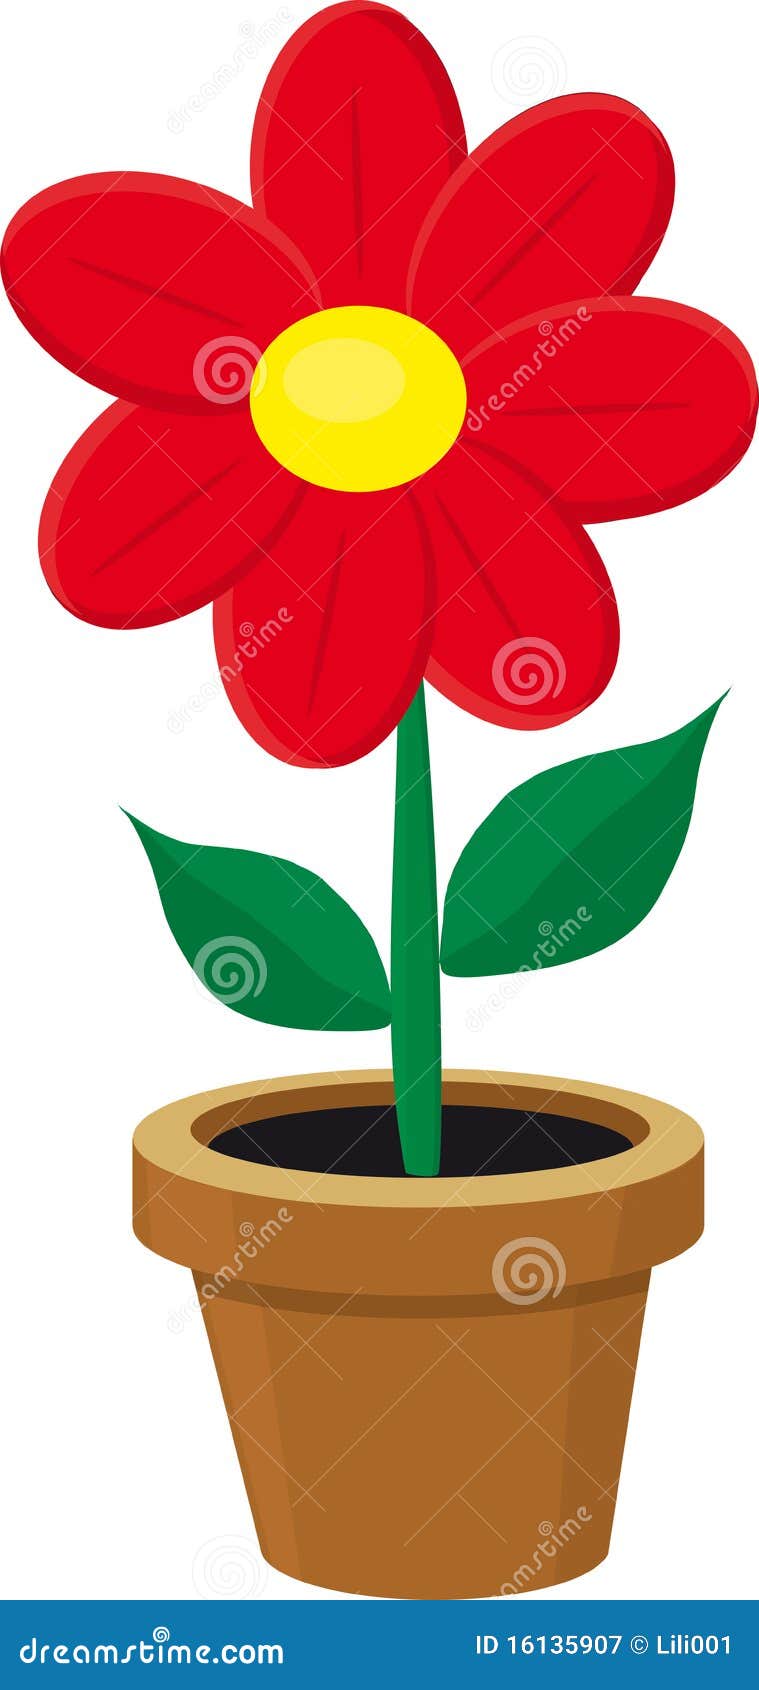 Flower in the pot stock vector. Illustration of floral - 16135907